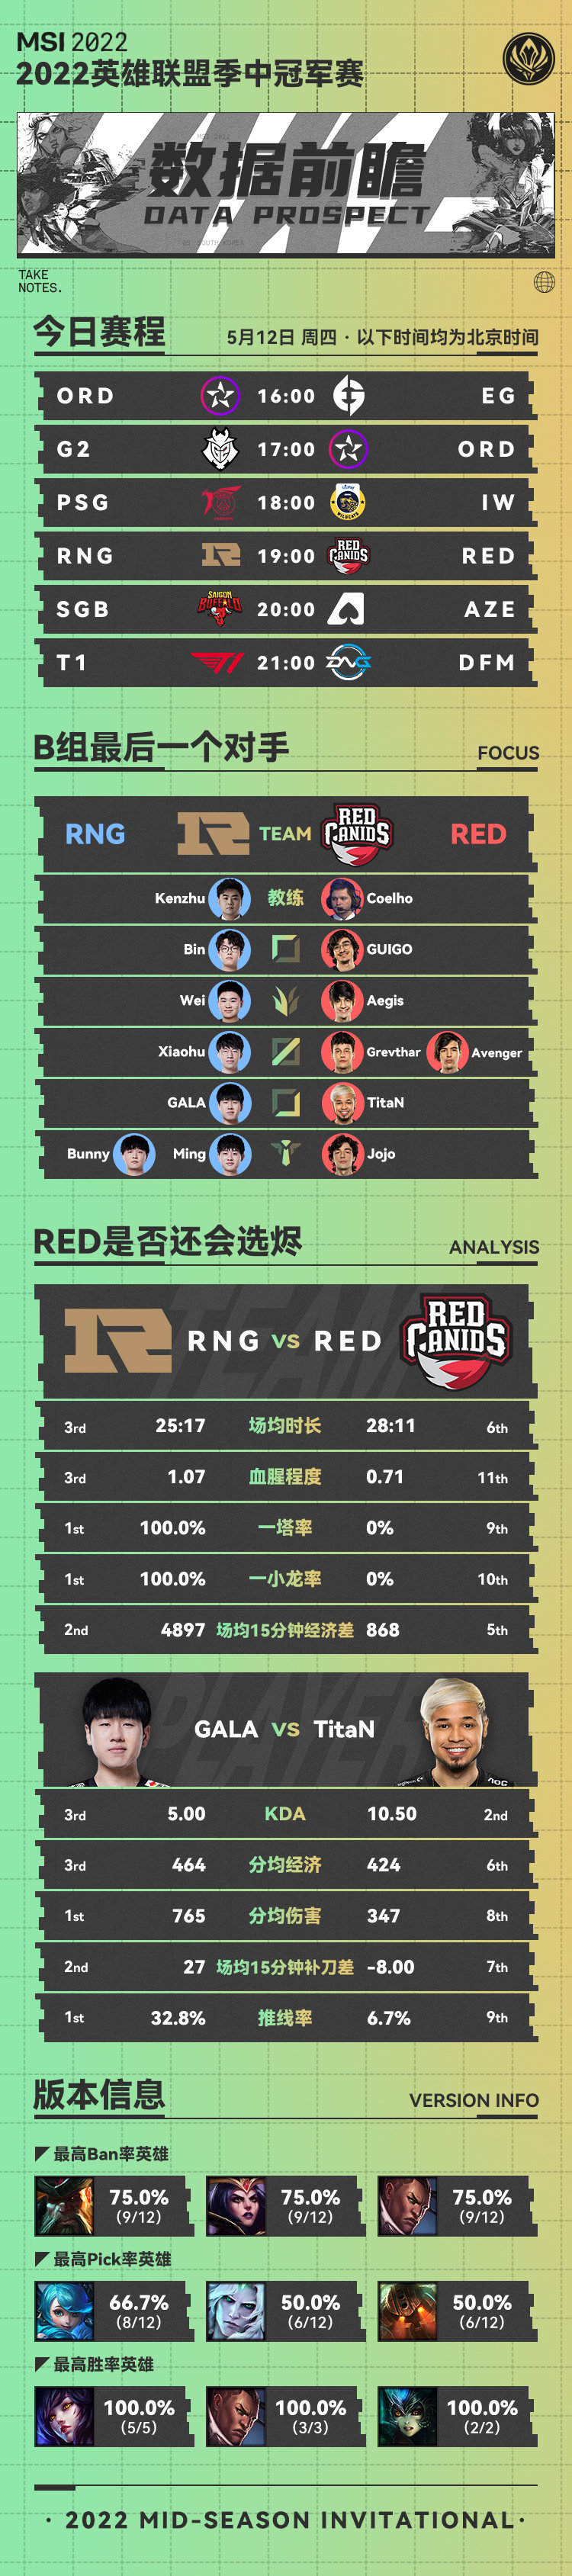 2022MSI数据前瞻小组赛Day3：RNG vs RED